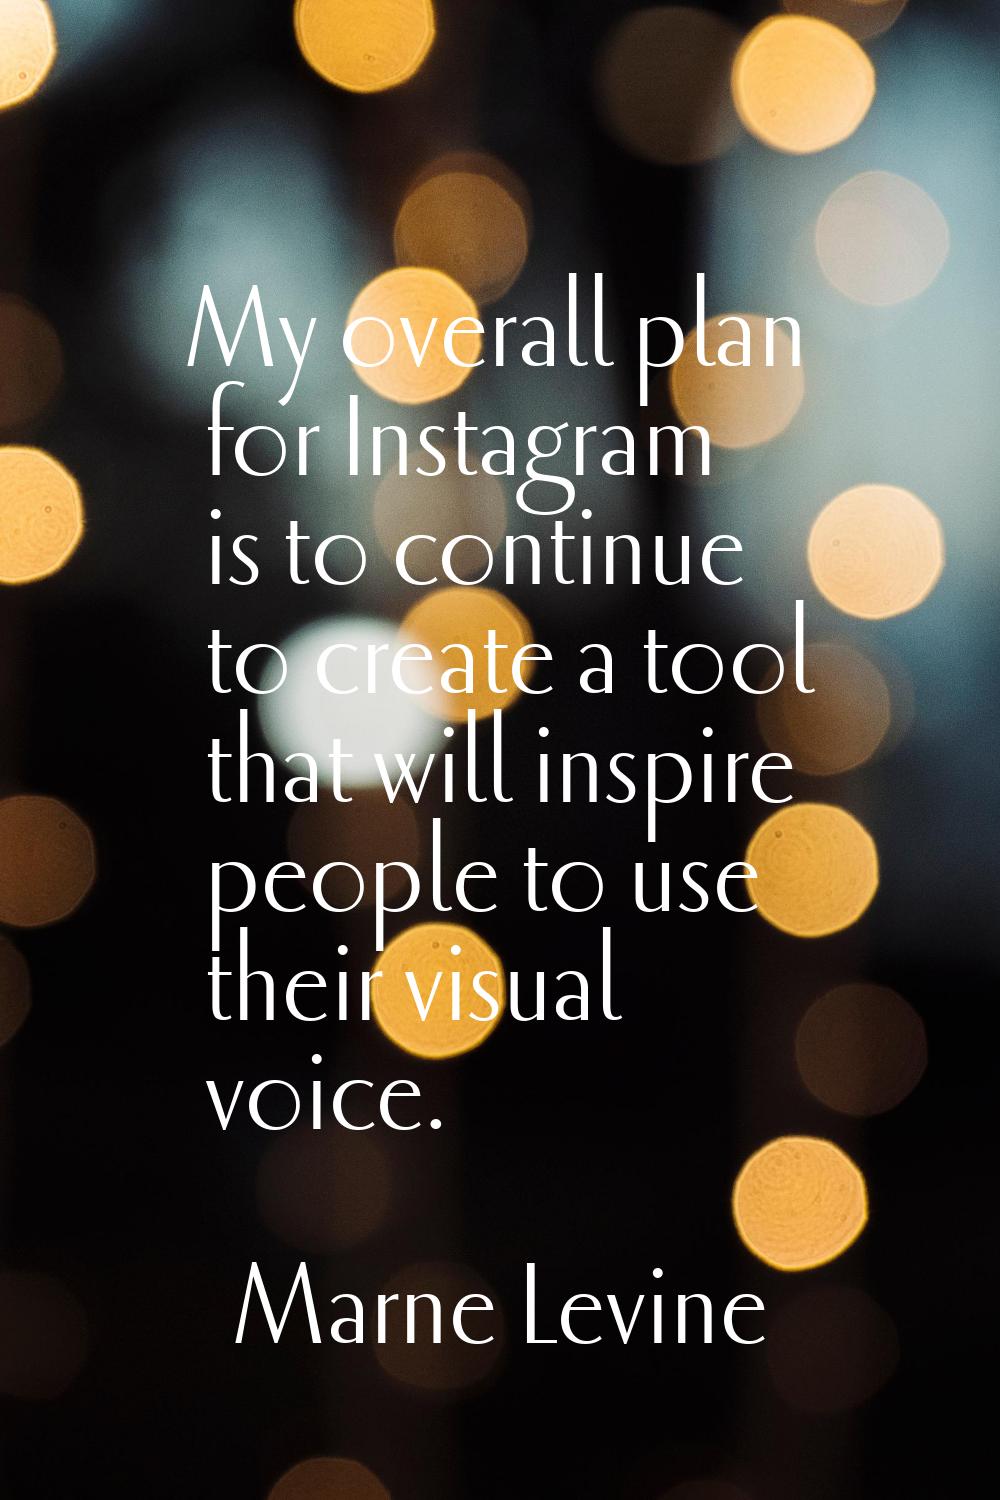 My overall plan for Instagram is to continue to create a tool that will inspire people to use their